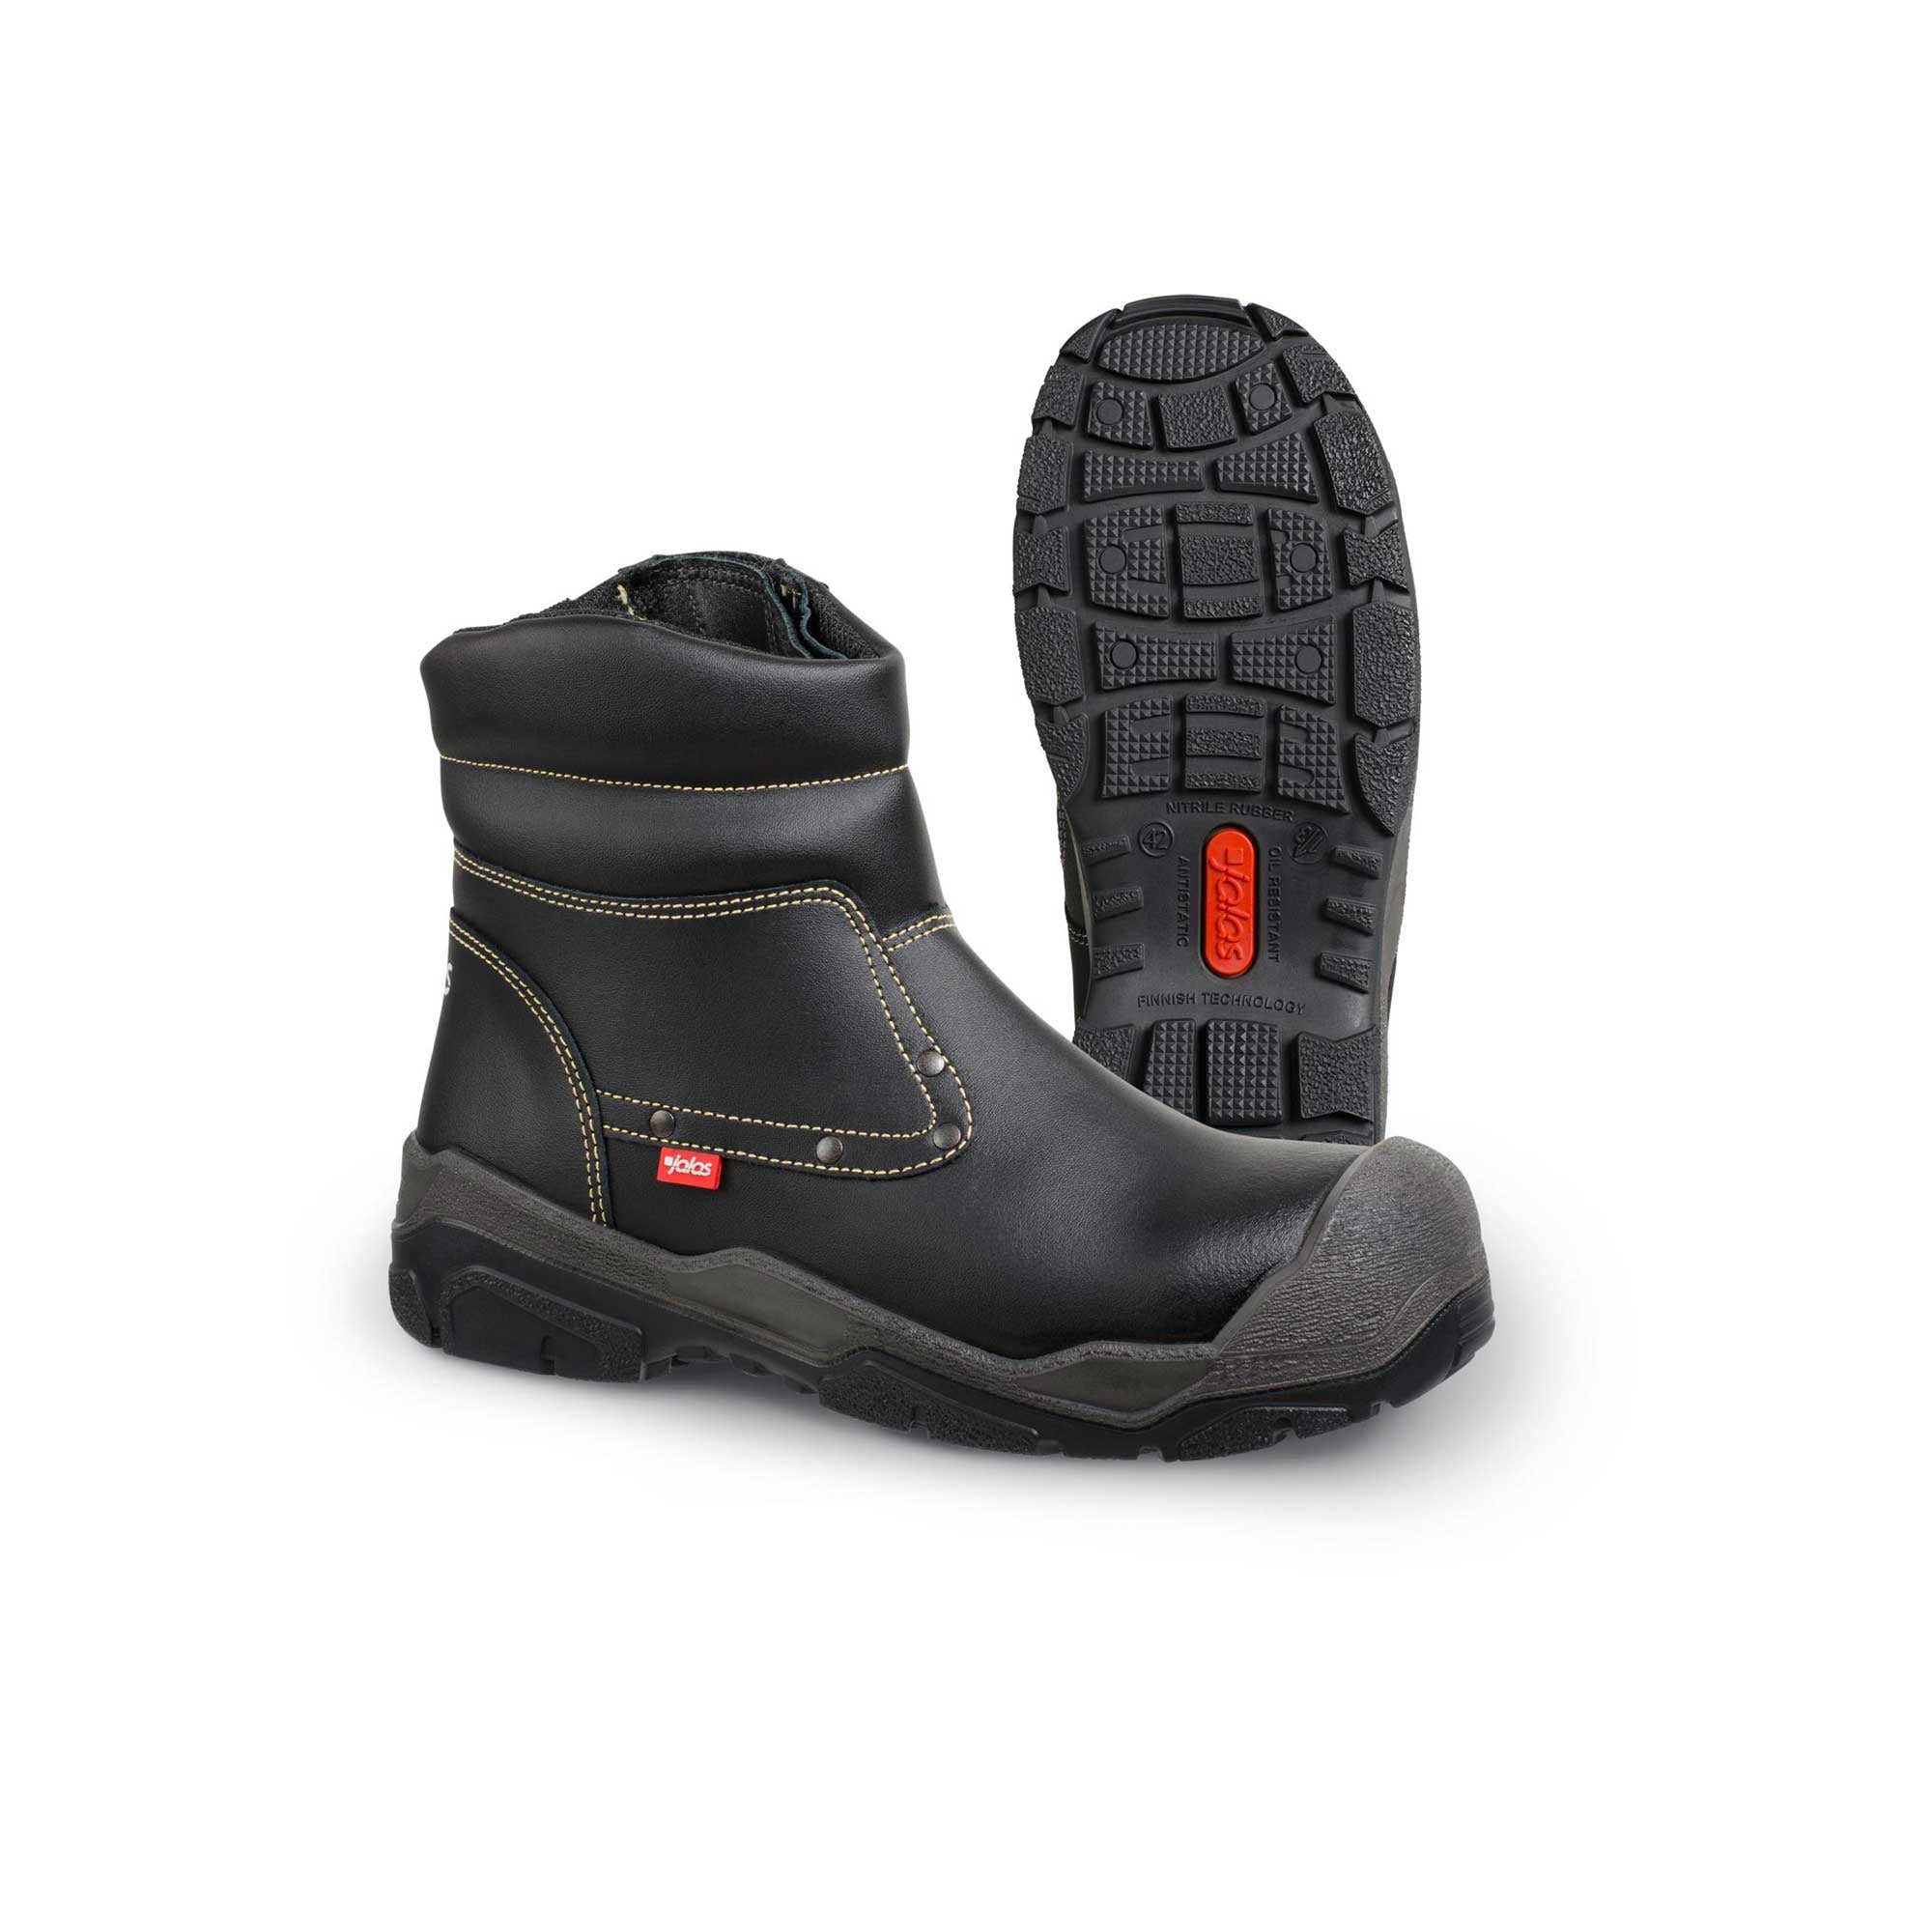 jalas safety boots